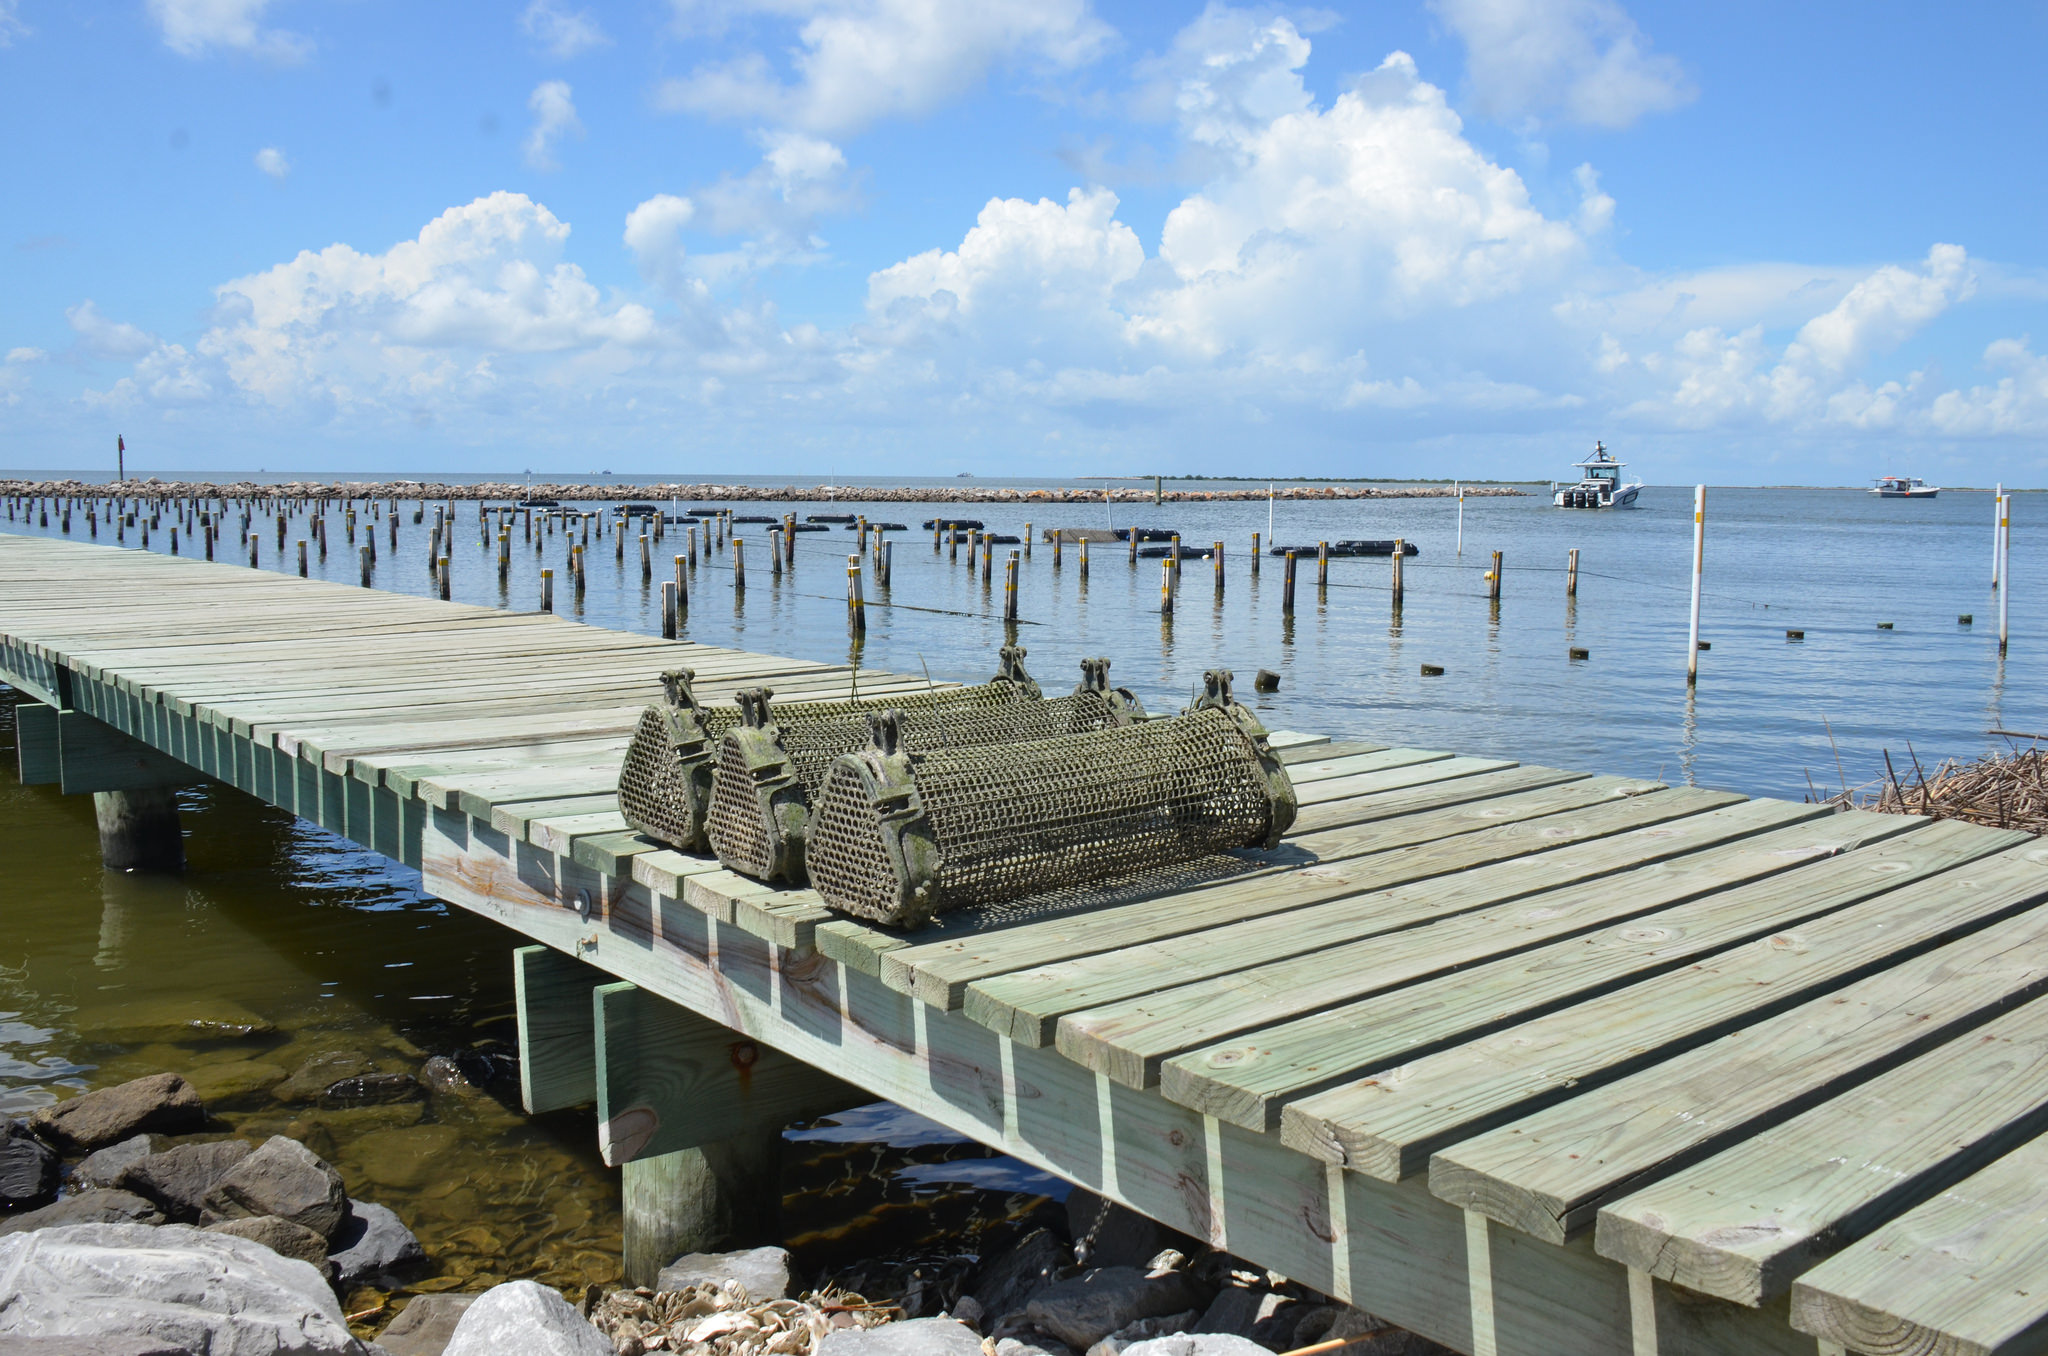 cages for alternative oyster culture on pier with longlines in water behind